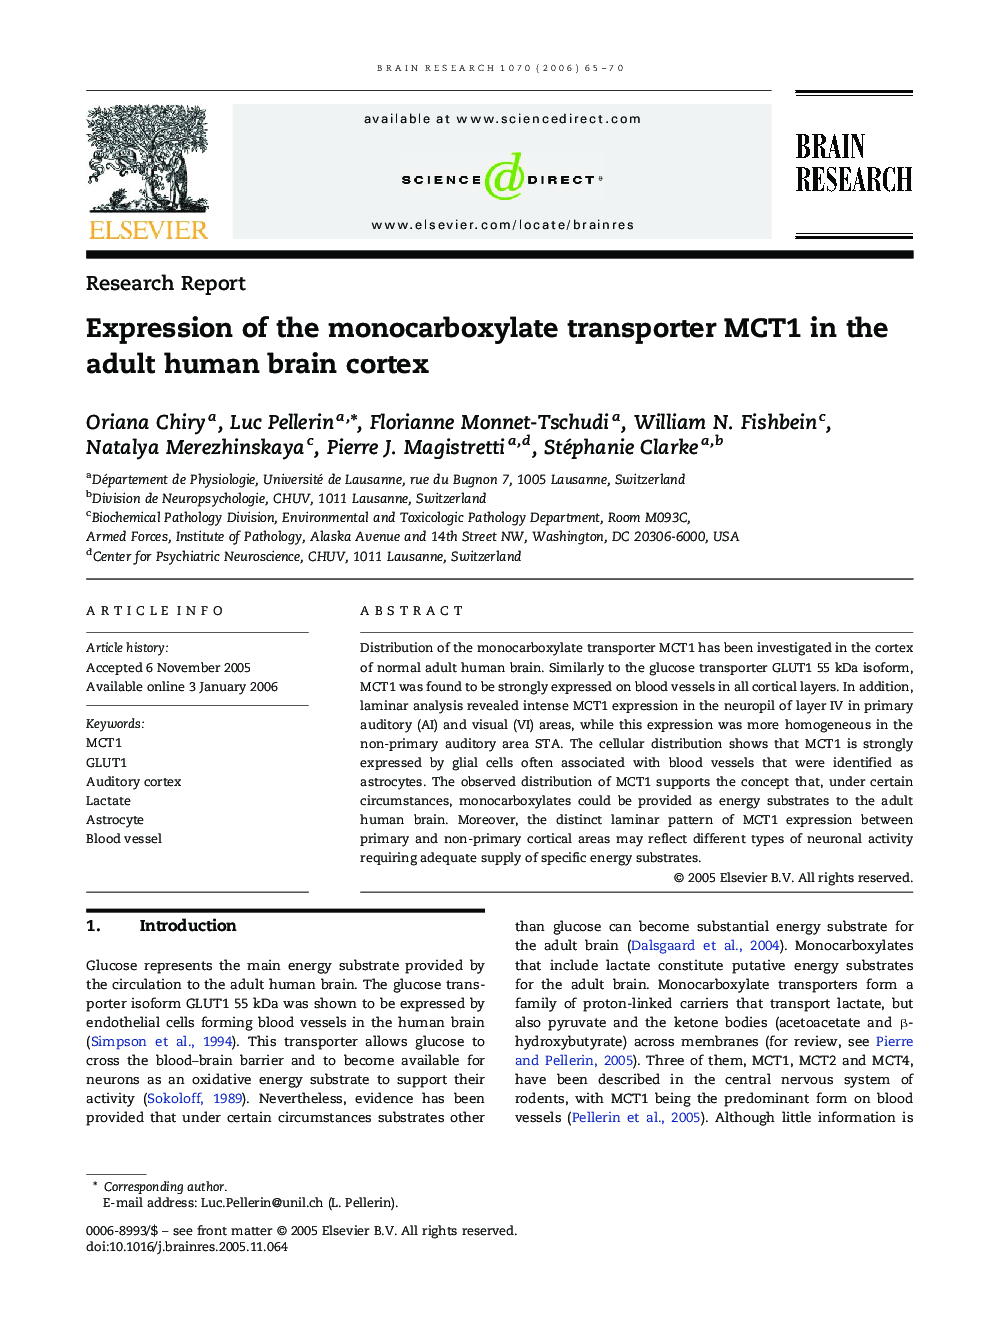 Expression of the monocarboxylate transporter MCT1 in the adult human brain cortex